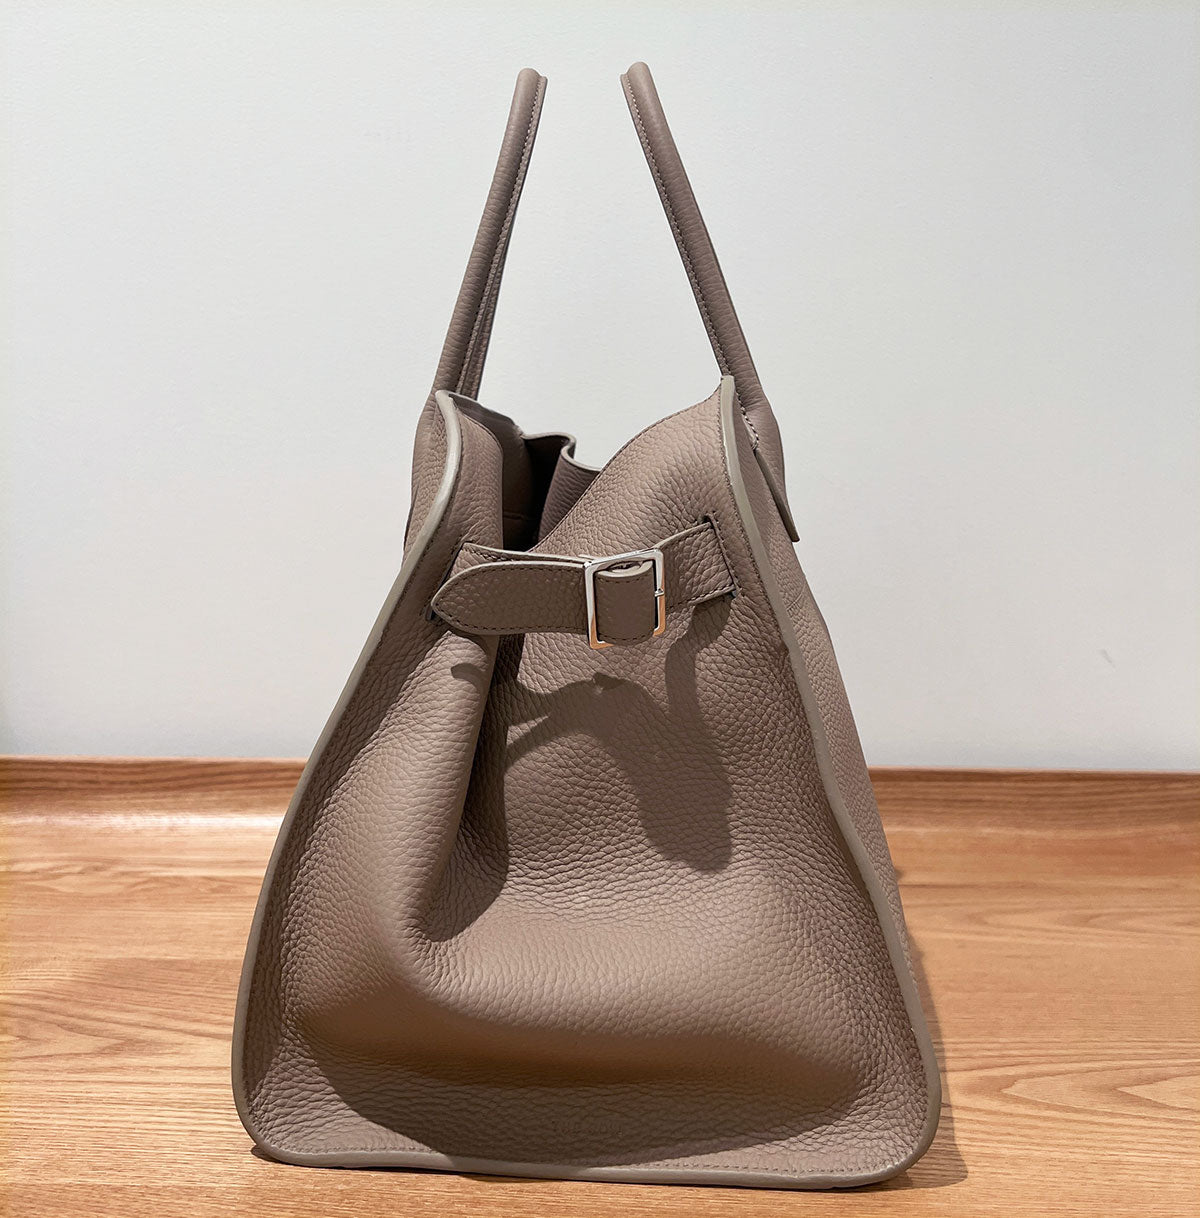 The Row Soft Margaux 10 Bag in Dark Taupe